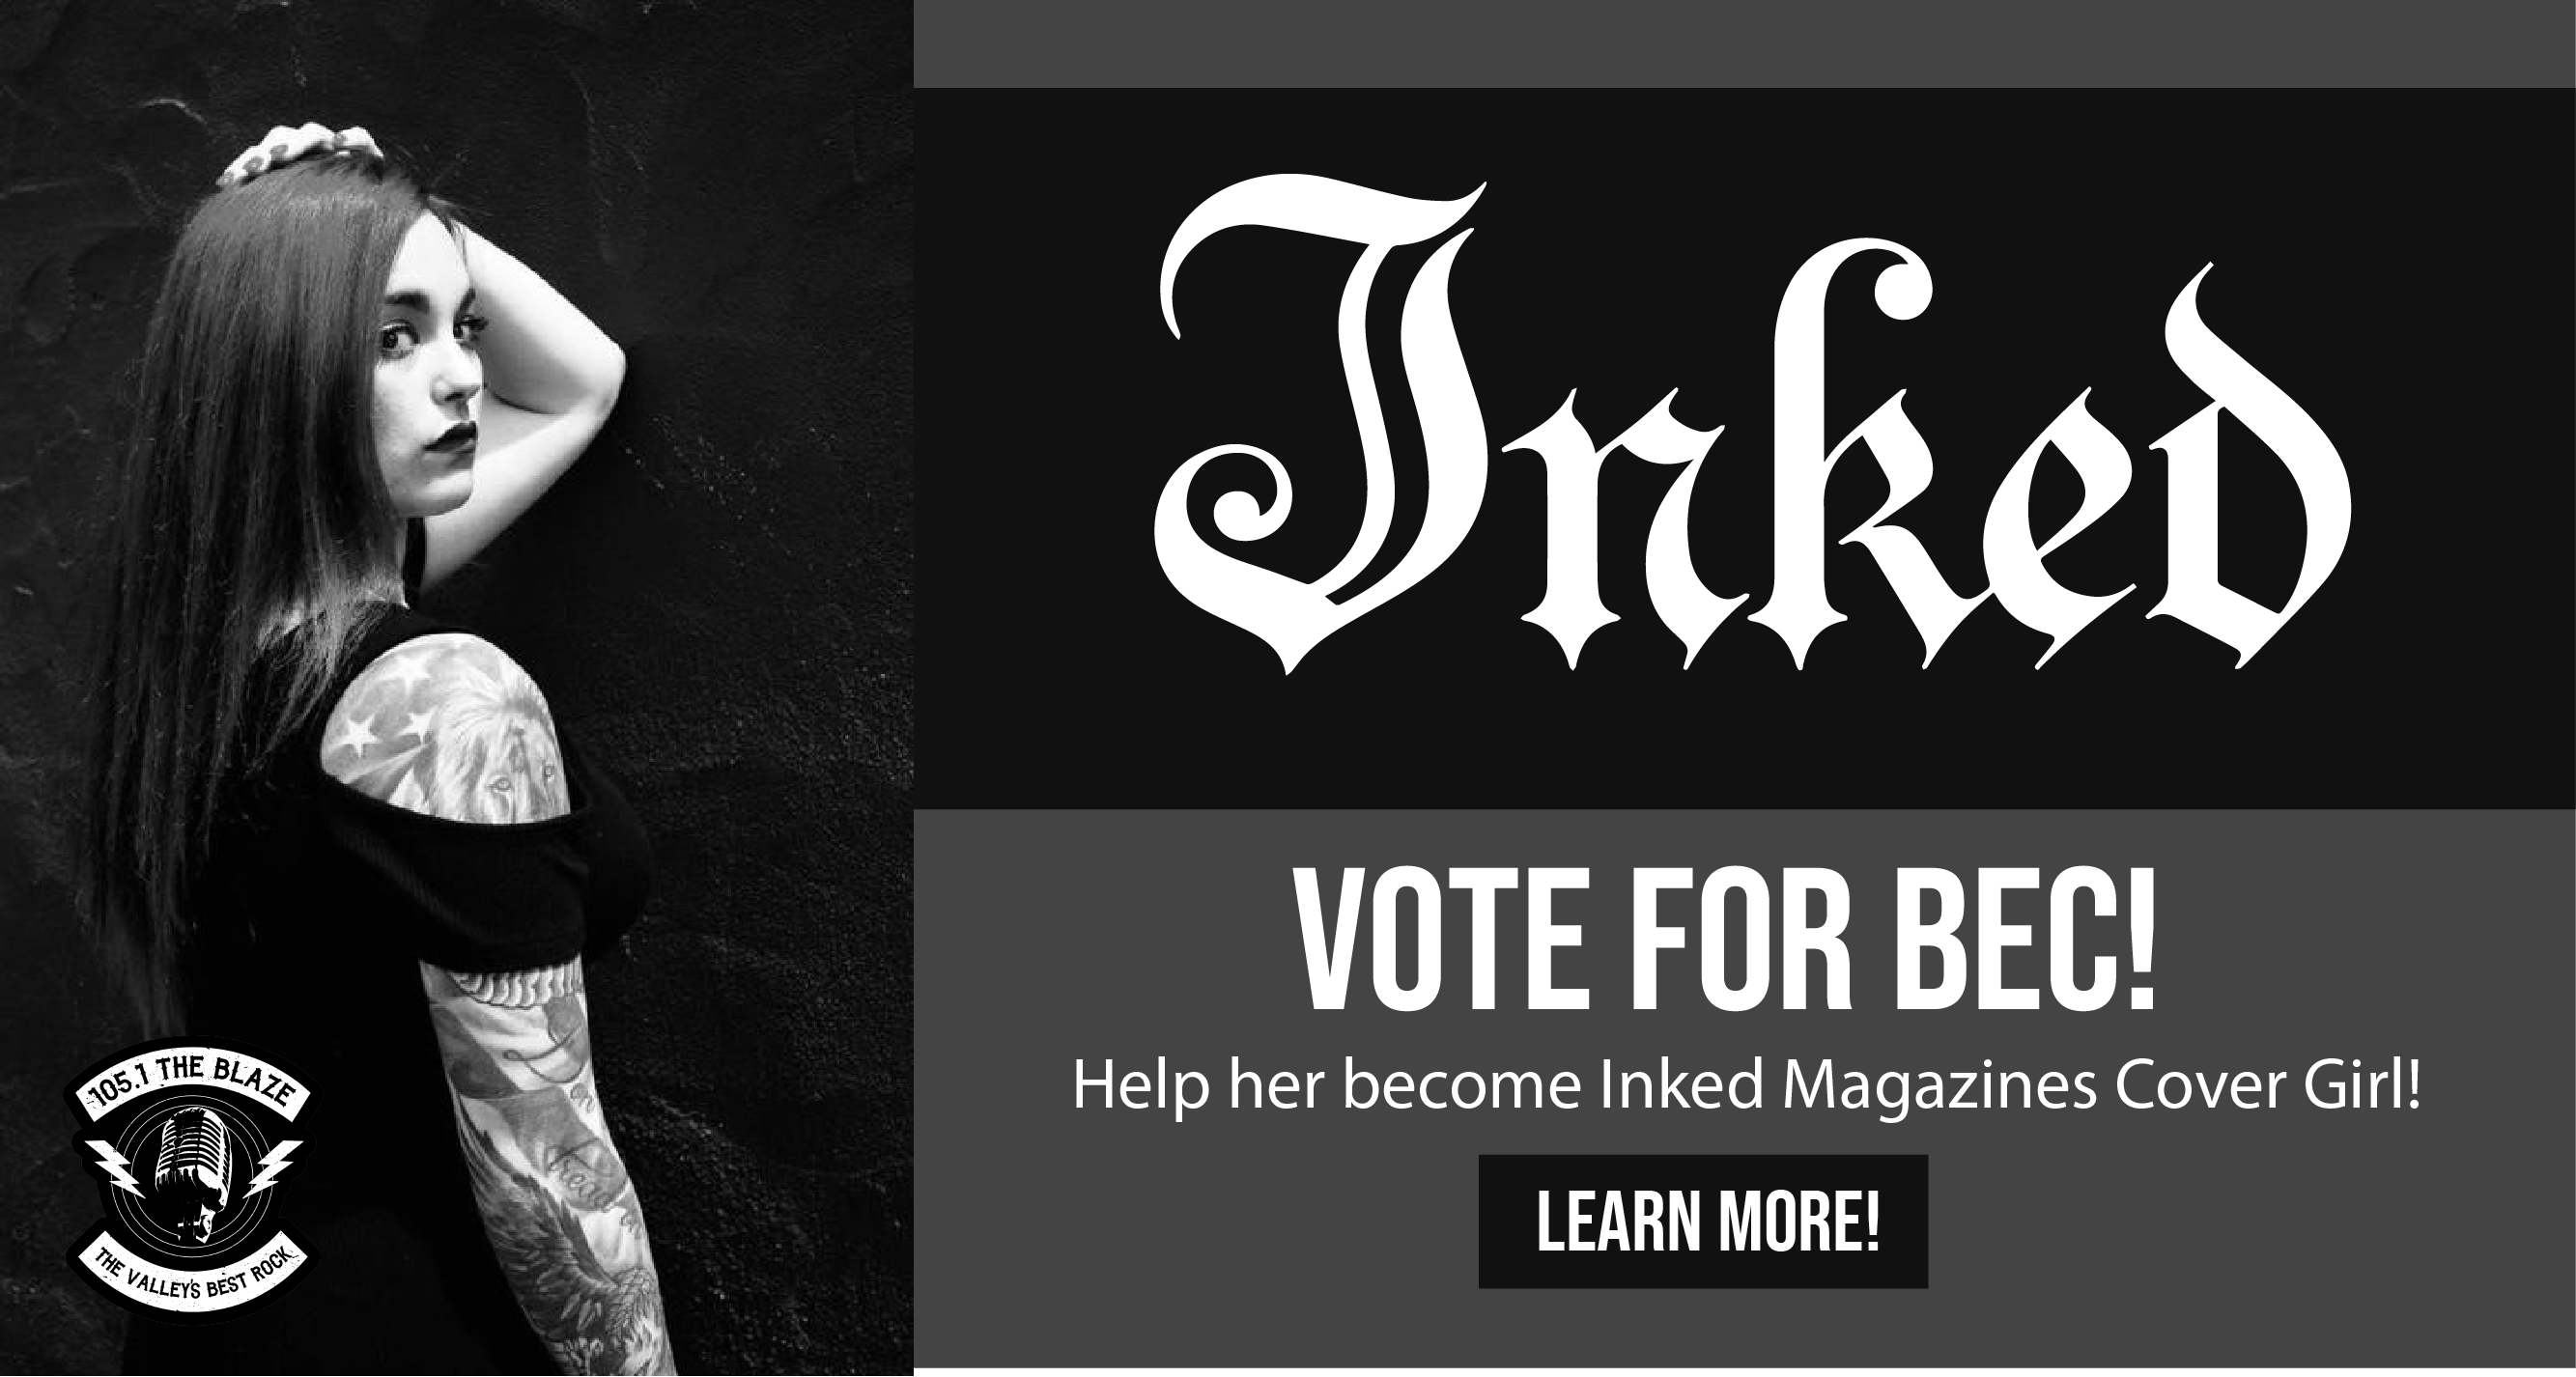 Vote For Bec Help Her Become Inked Magazines Cover Girl 105 1 The Blaze